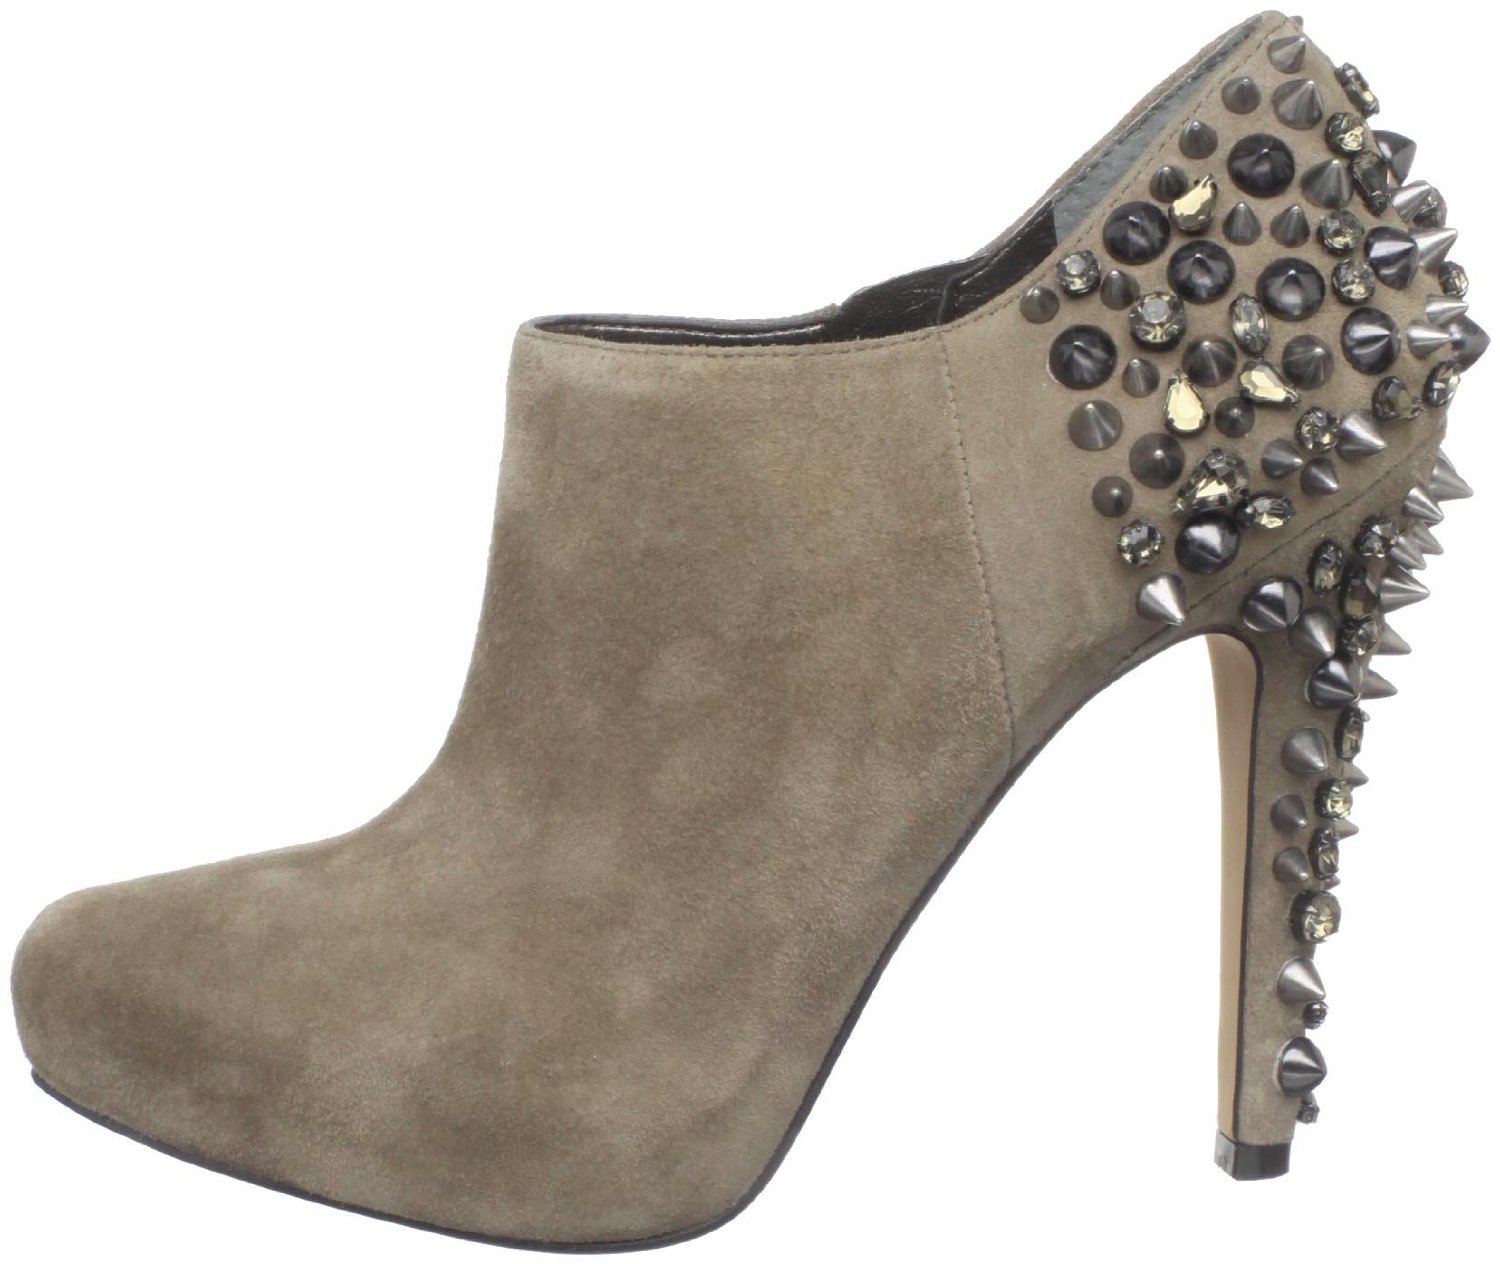 DIARY OF A CLOTHESHORSE: TODAY'S SHOES ARE FROM SAM EDELMAN